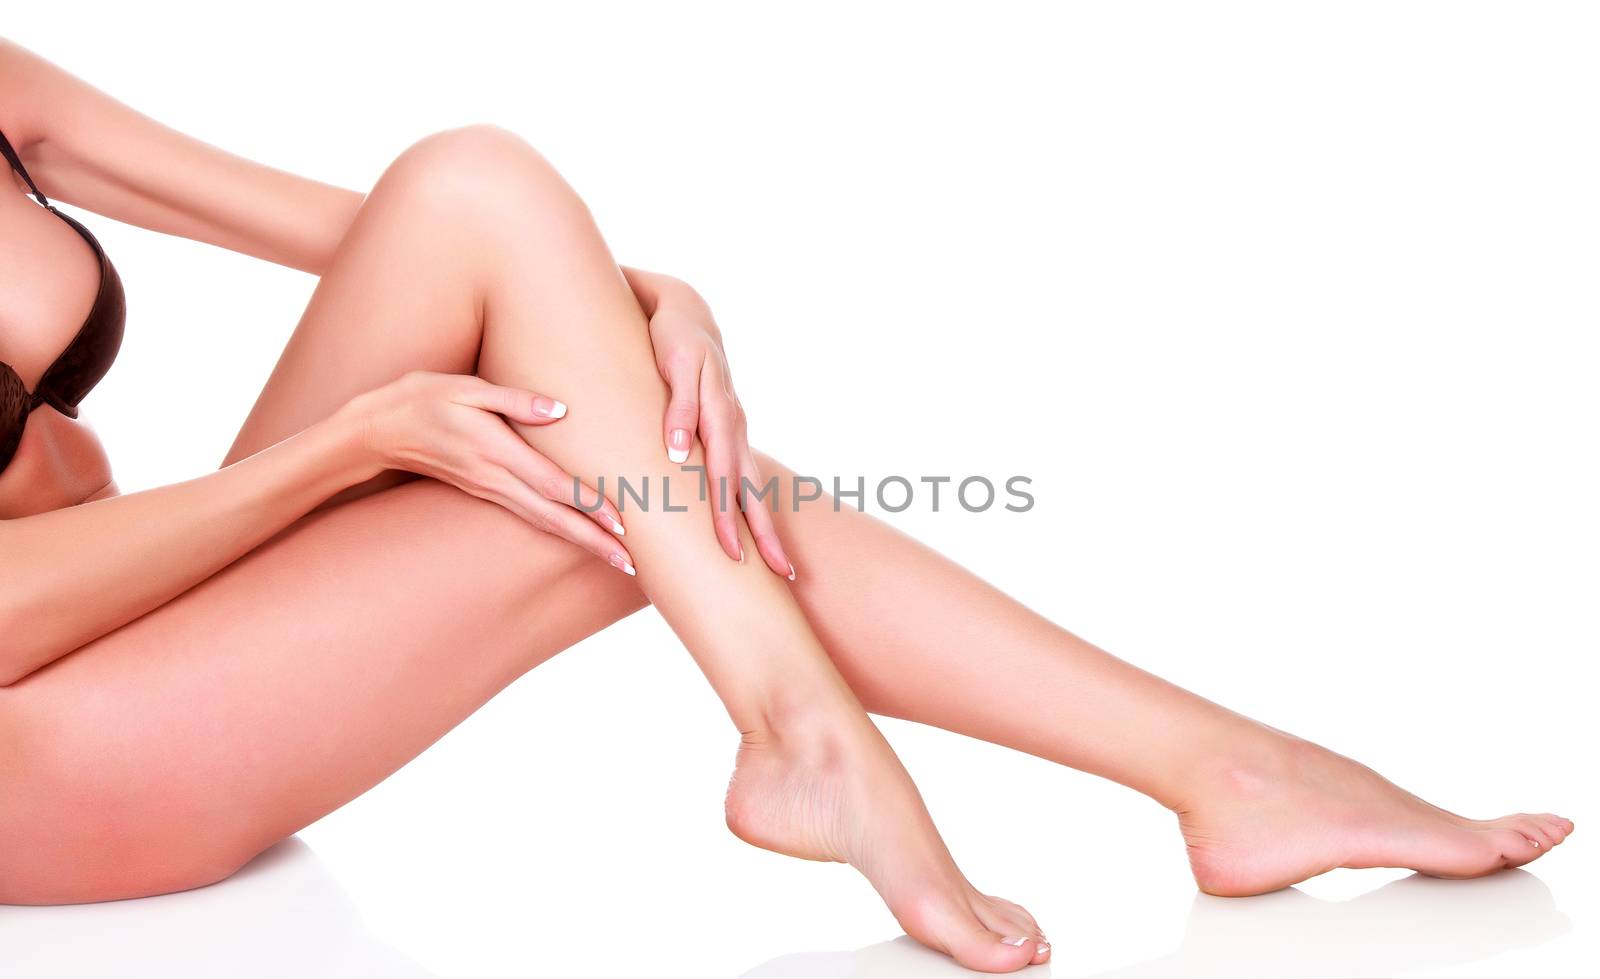 Woman's legs and hands, isolated on white background by Nobilior